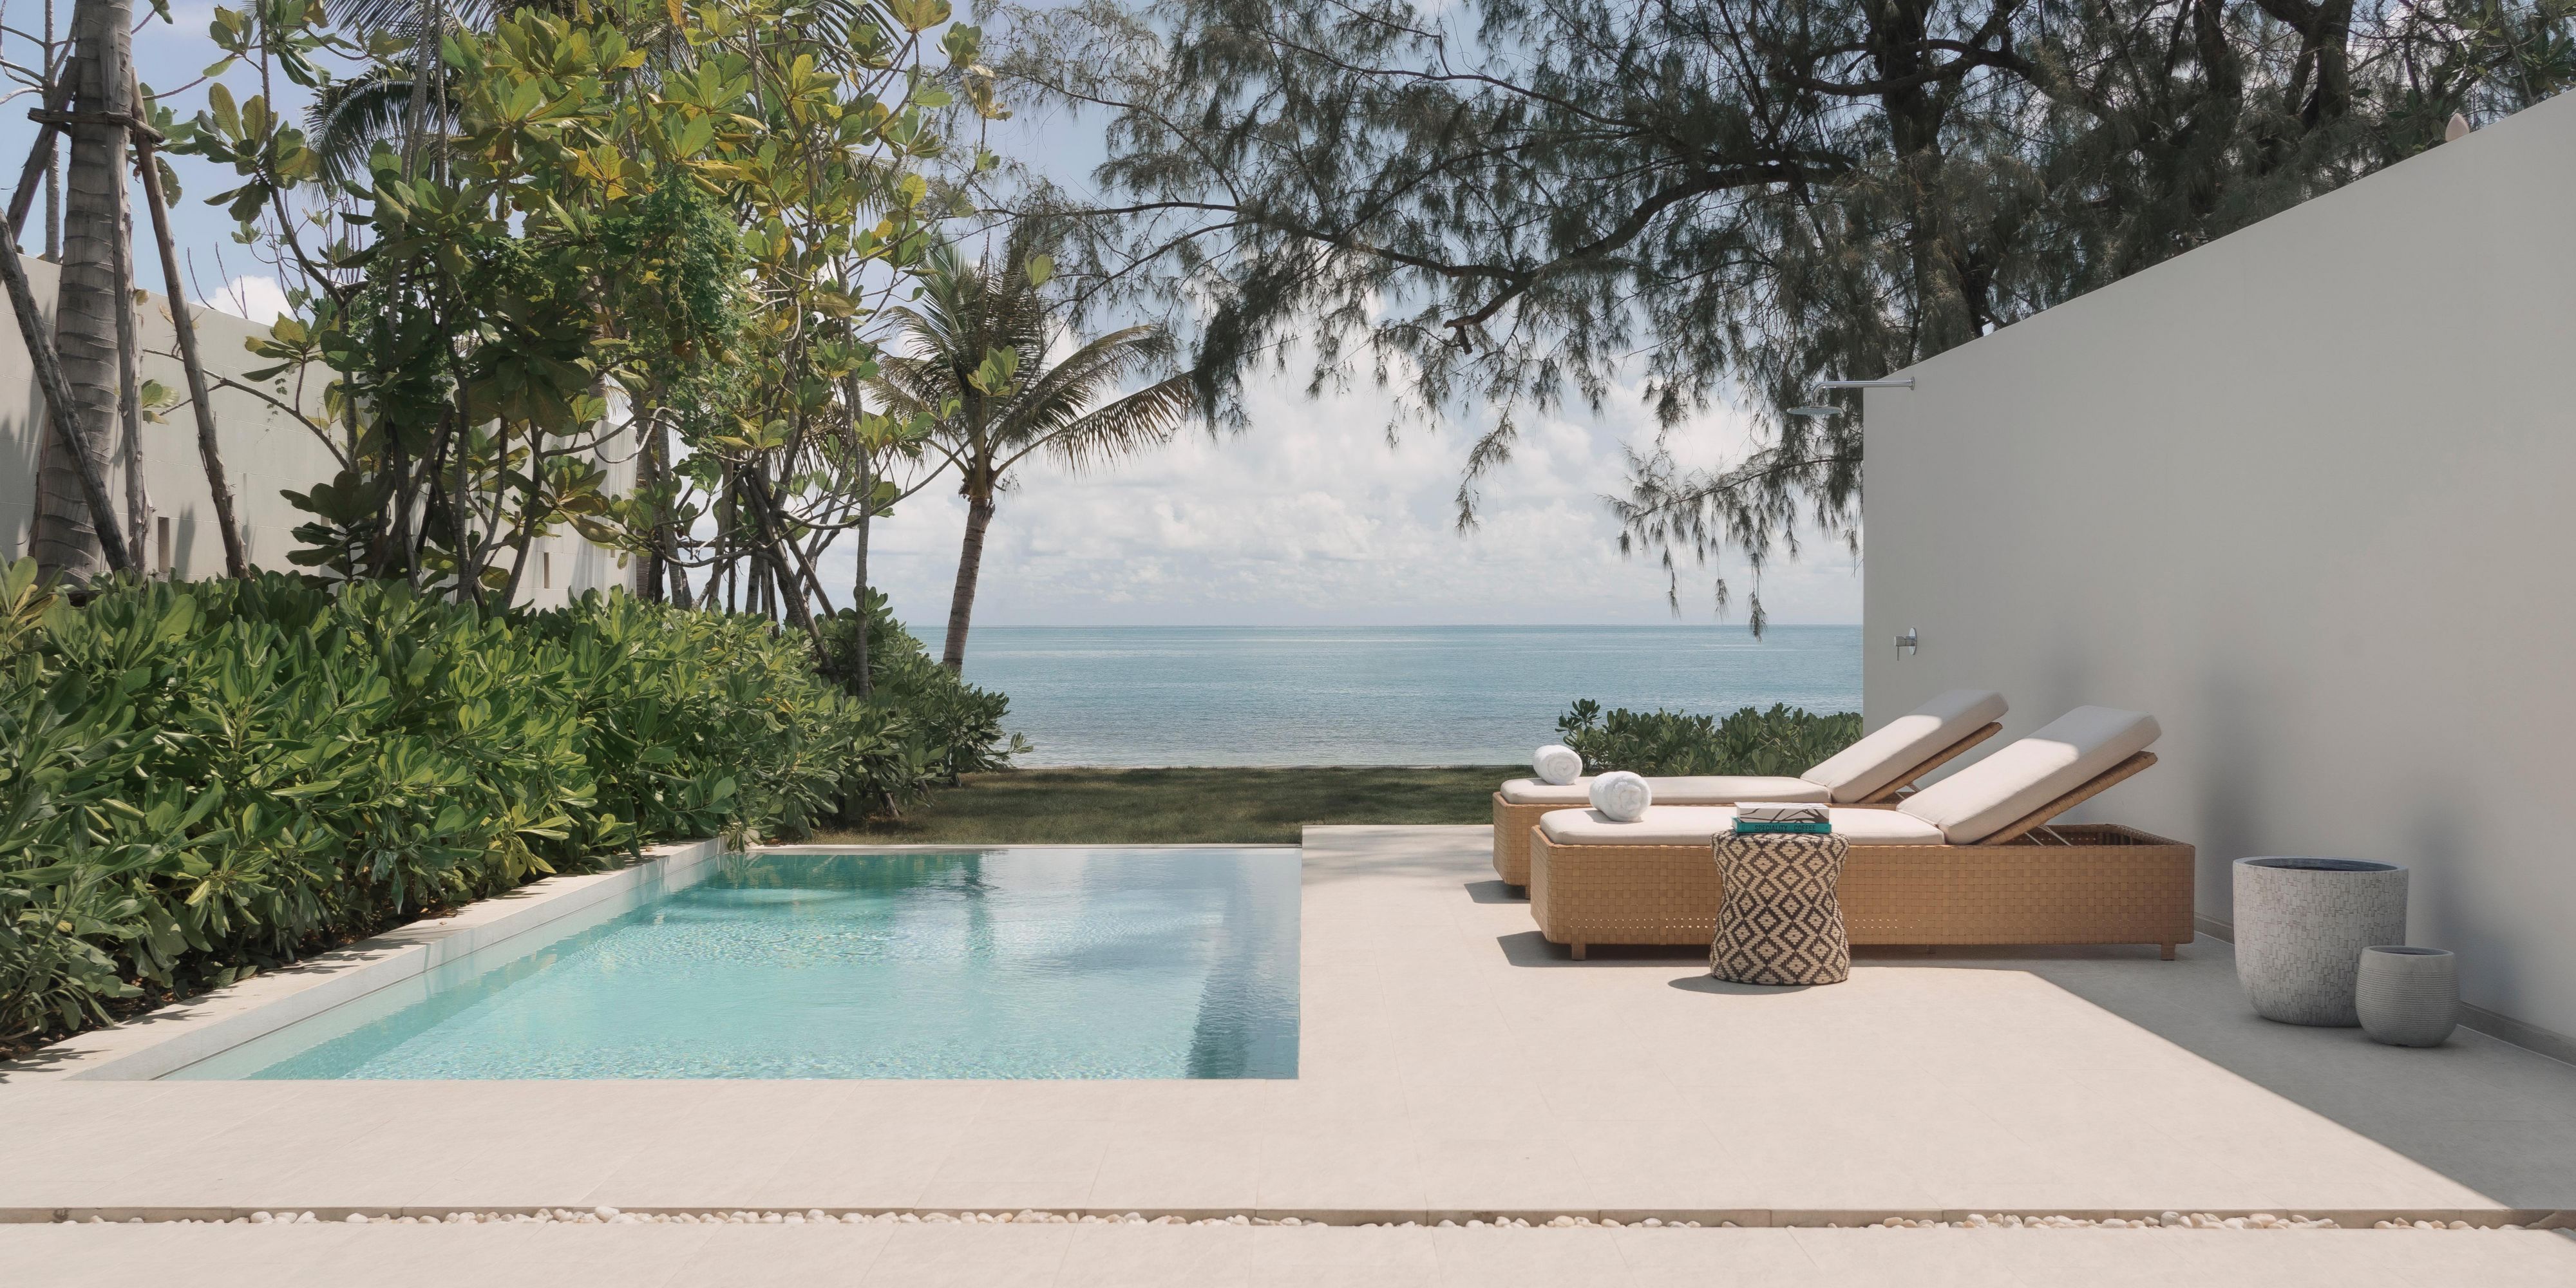 Our 21 stunning oceanfront villas offer direct and private access to our unspoilt stretch of sand on Choeng Mon Beach. Each of our design-forward villas focuses on sumptuous natural materials and colours.